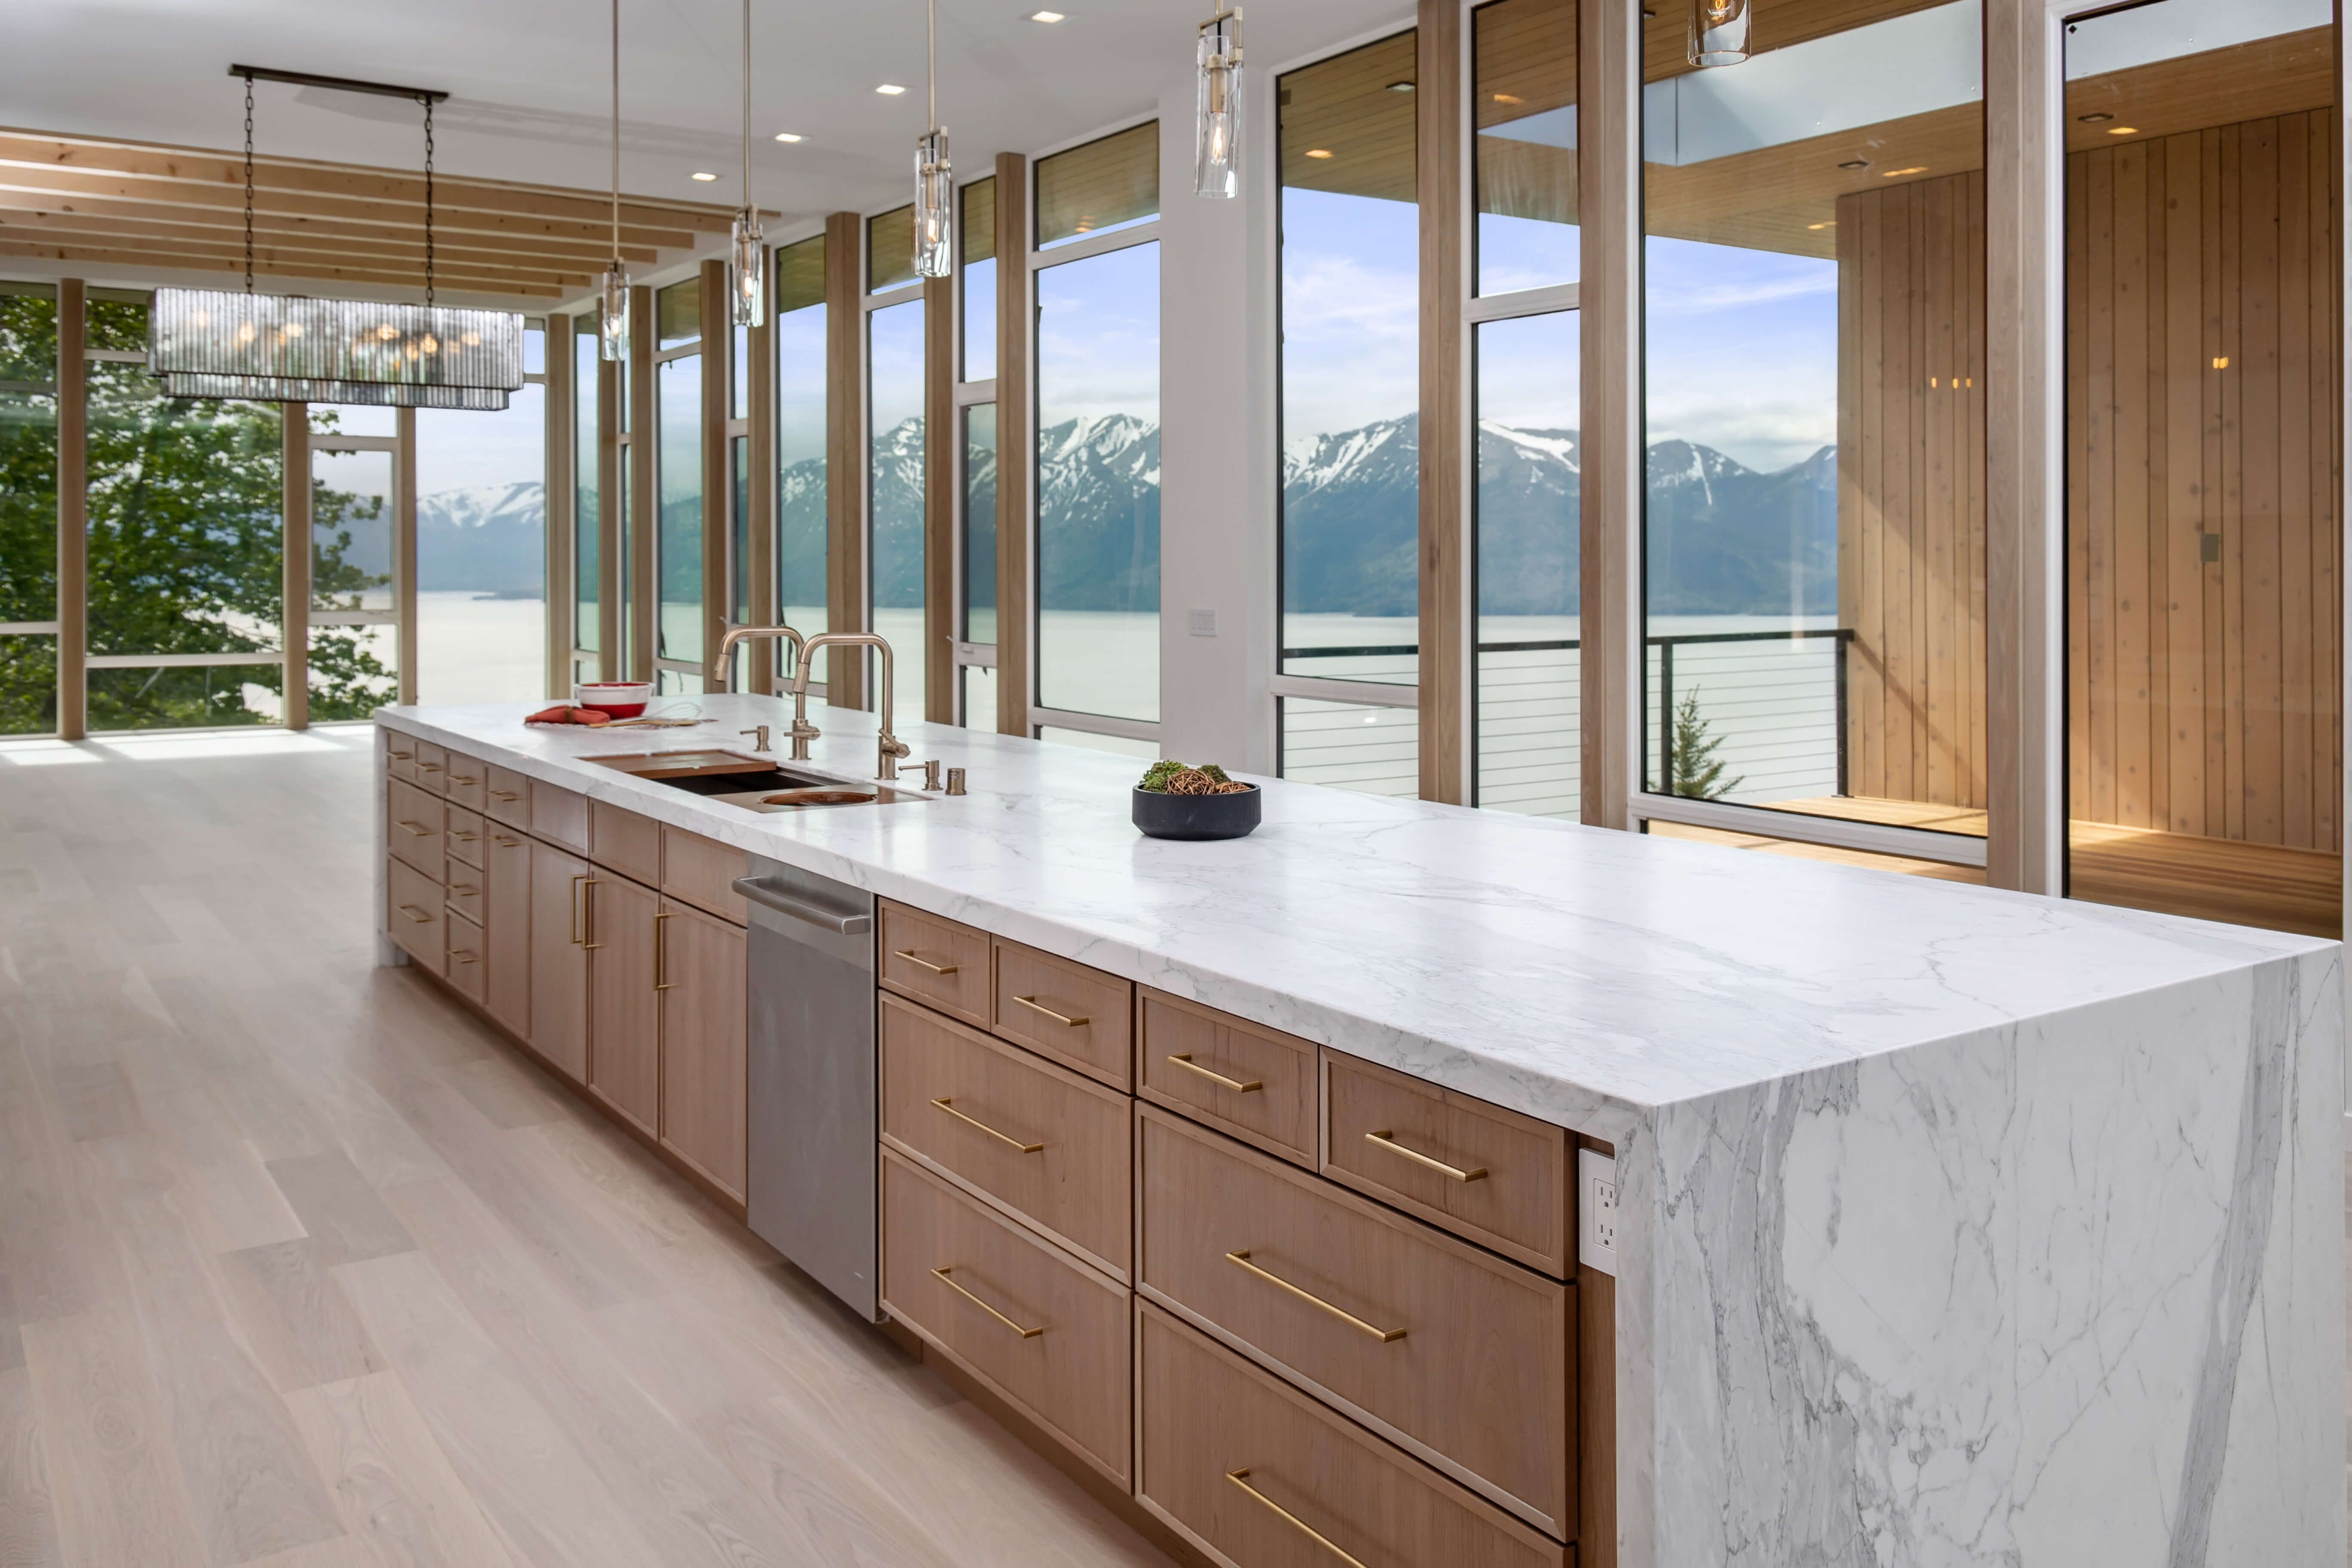 A very long kitchen island with light stained cherry cabinets and beautiful window views of the ocean and the mountainous landscape of Alaska.